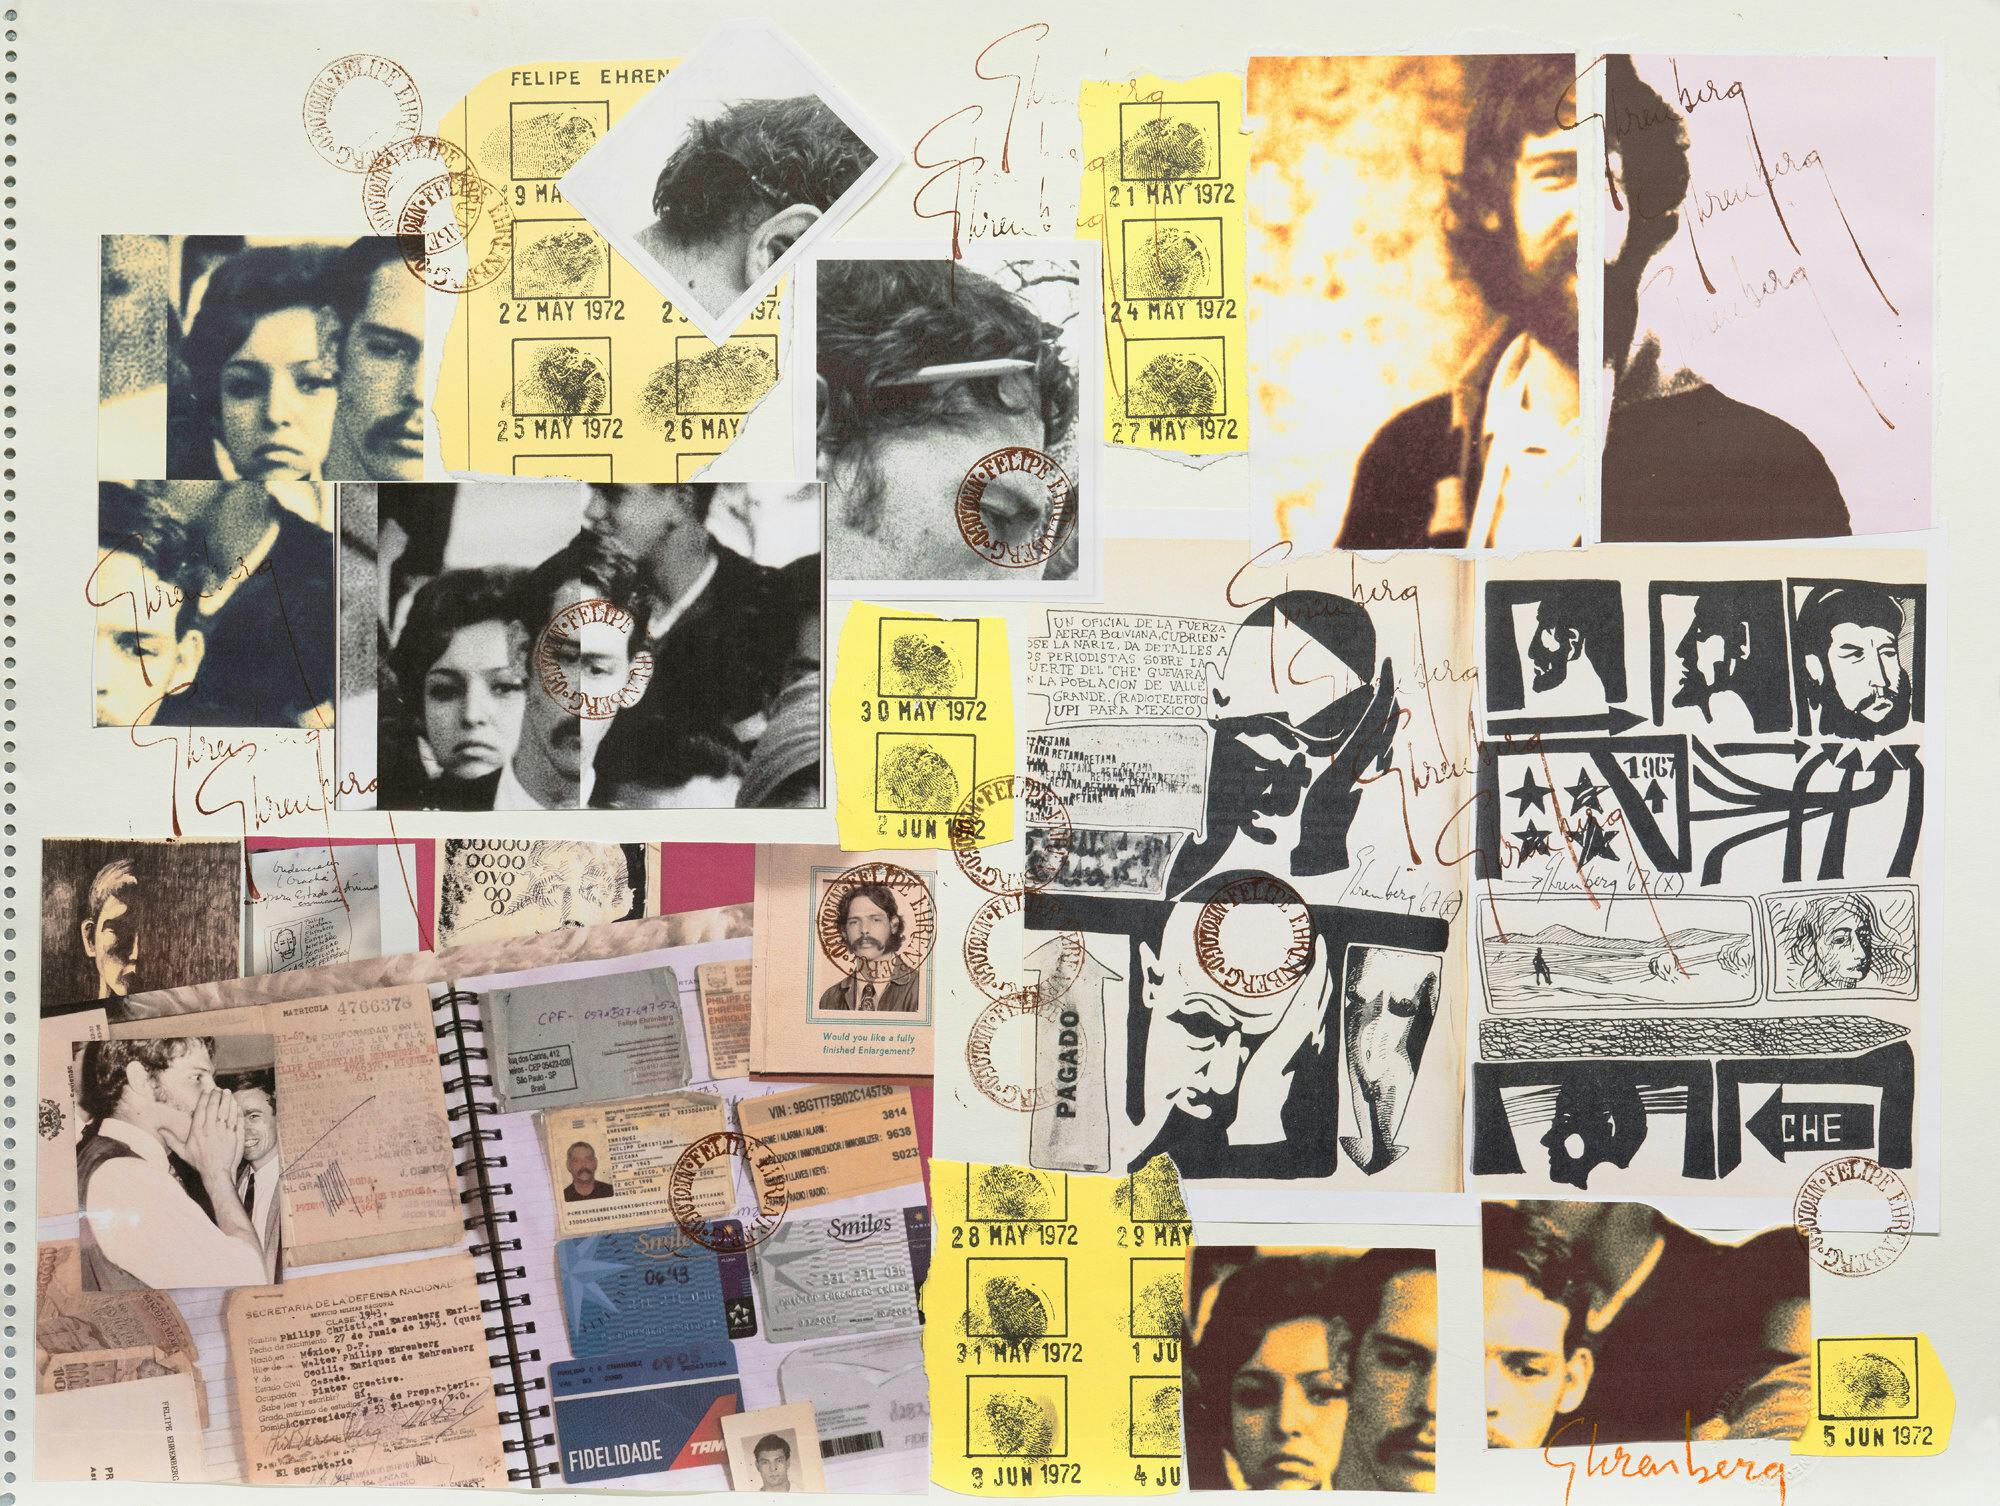 A collage showing fragments of official documents and photos, overlaid with stamps.